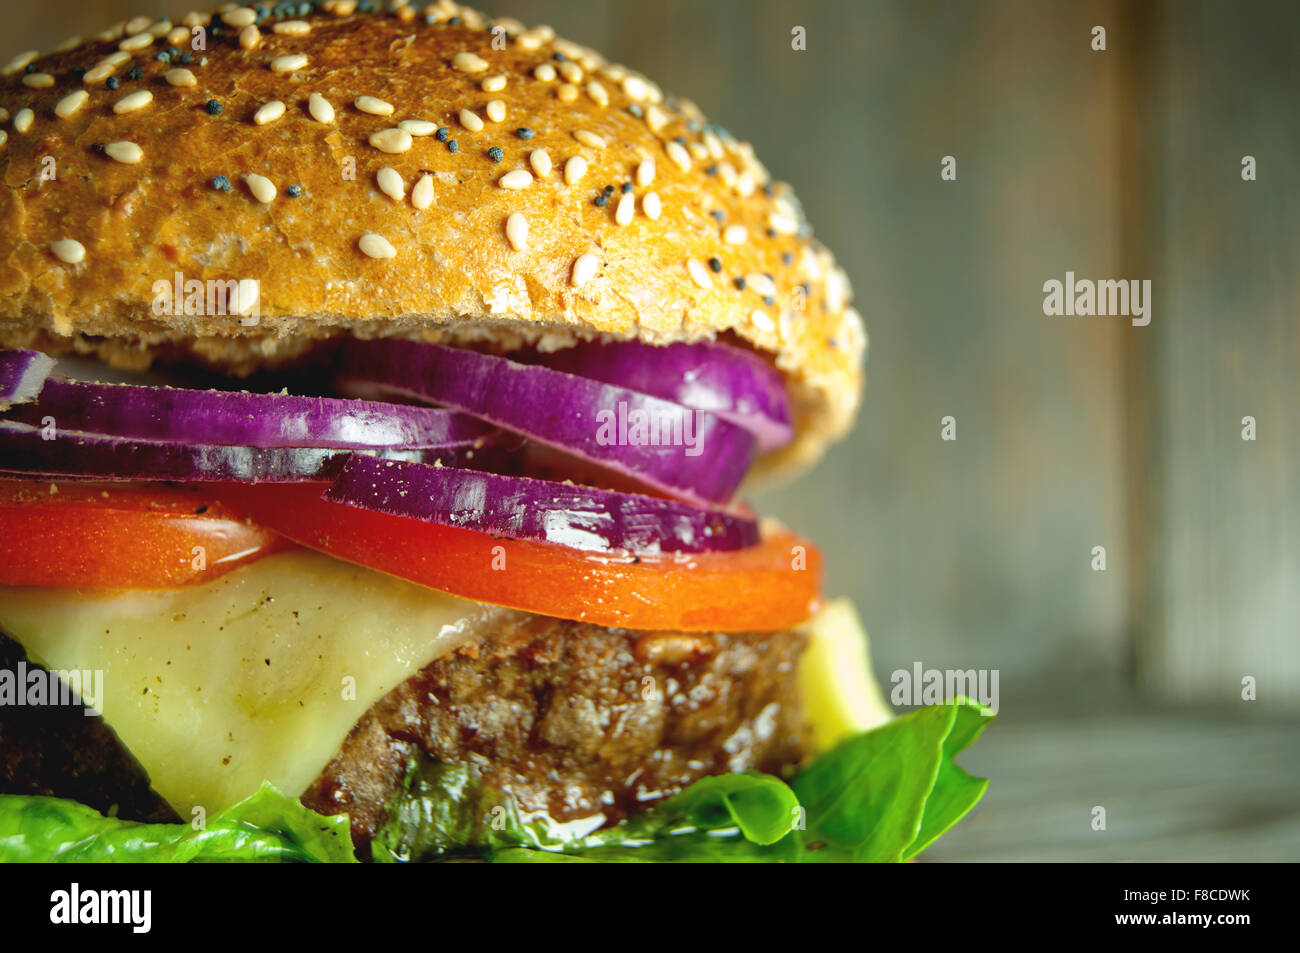 Close up of a gourmet burger with cheese, tomato and onion filling Stock Photo